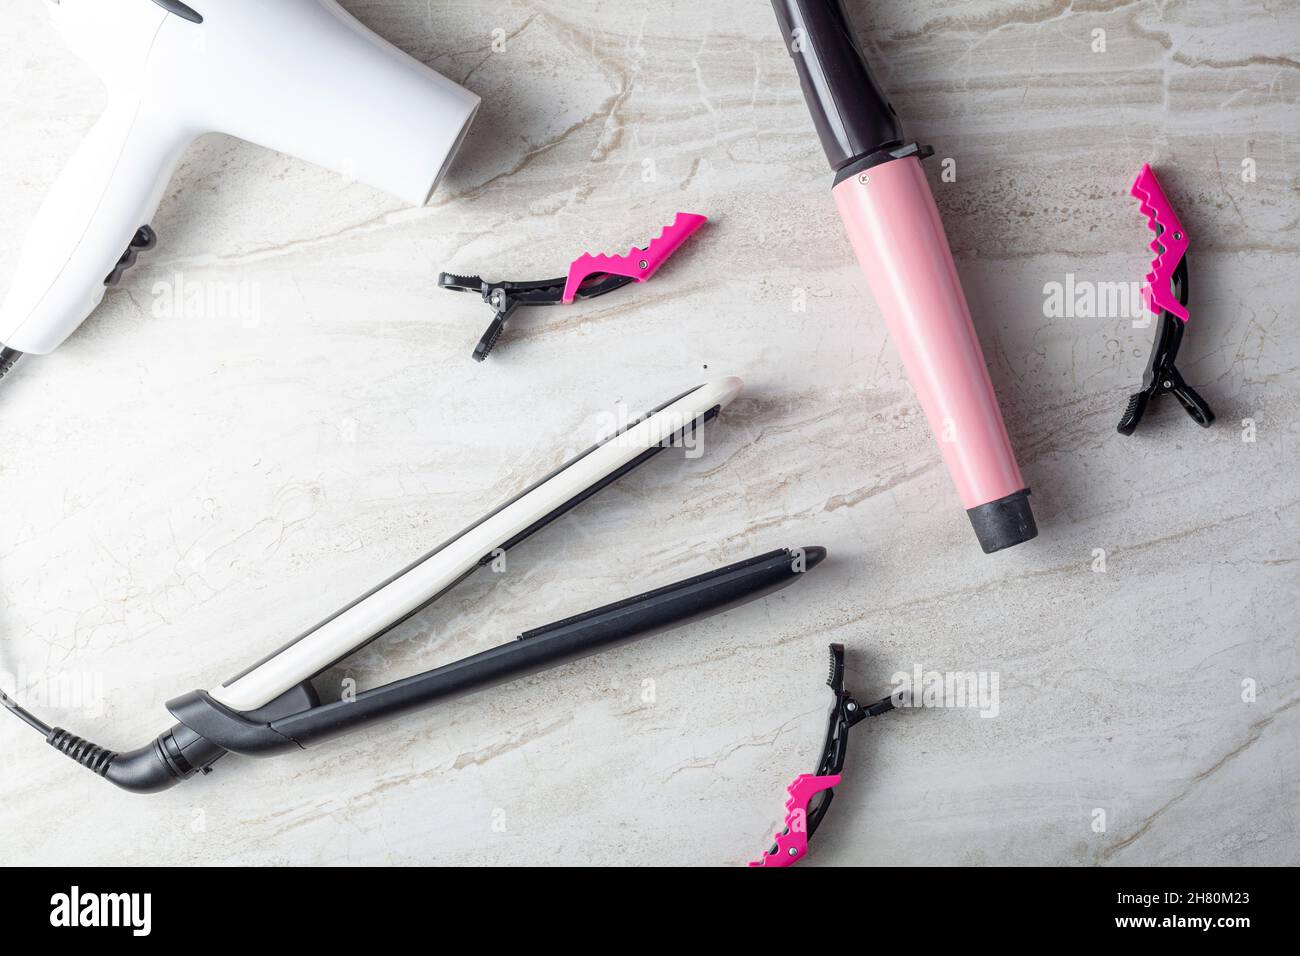 A collection of household tools used for DIY hairdo at home or in salon. The set includes curling and straightening wands, hair dryer and sectioning c Stock Photo